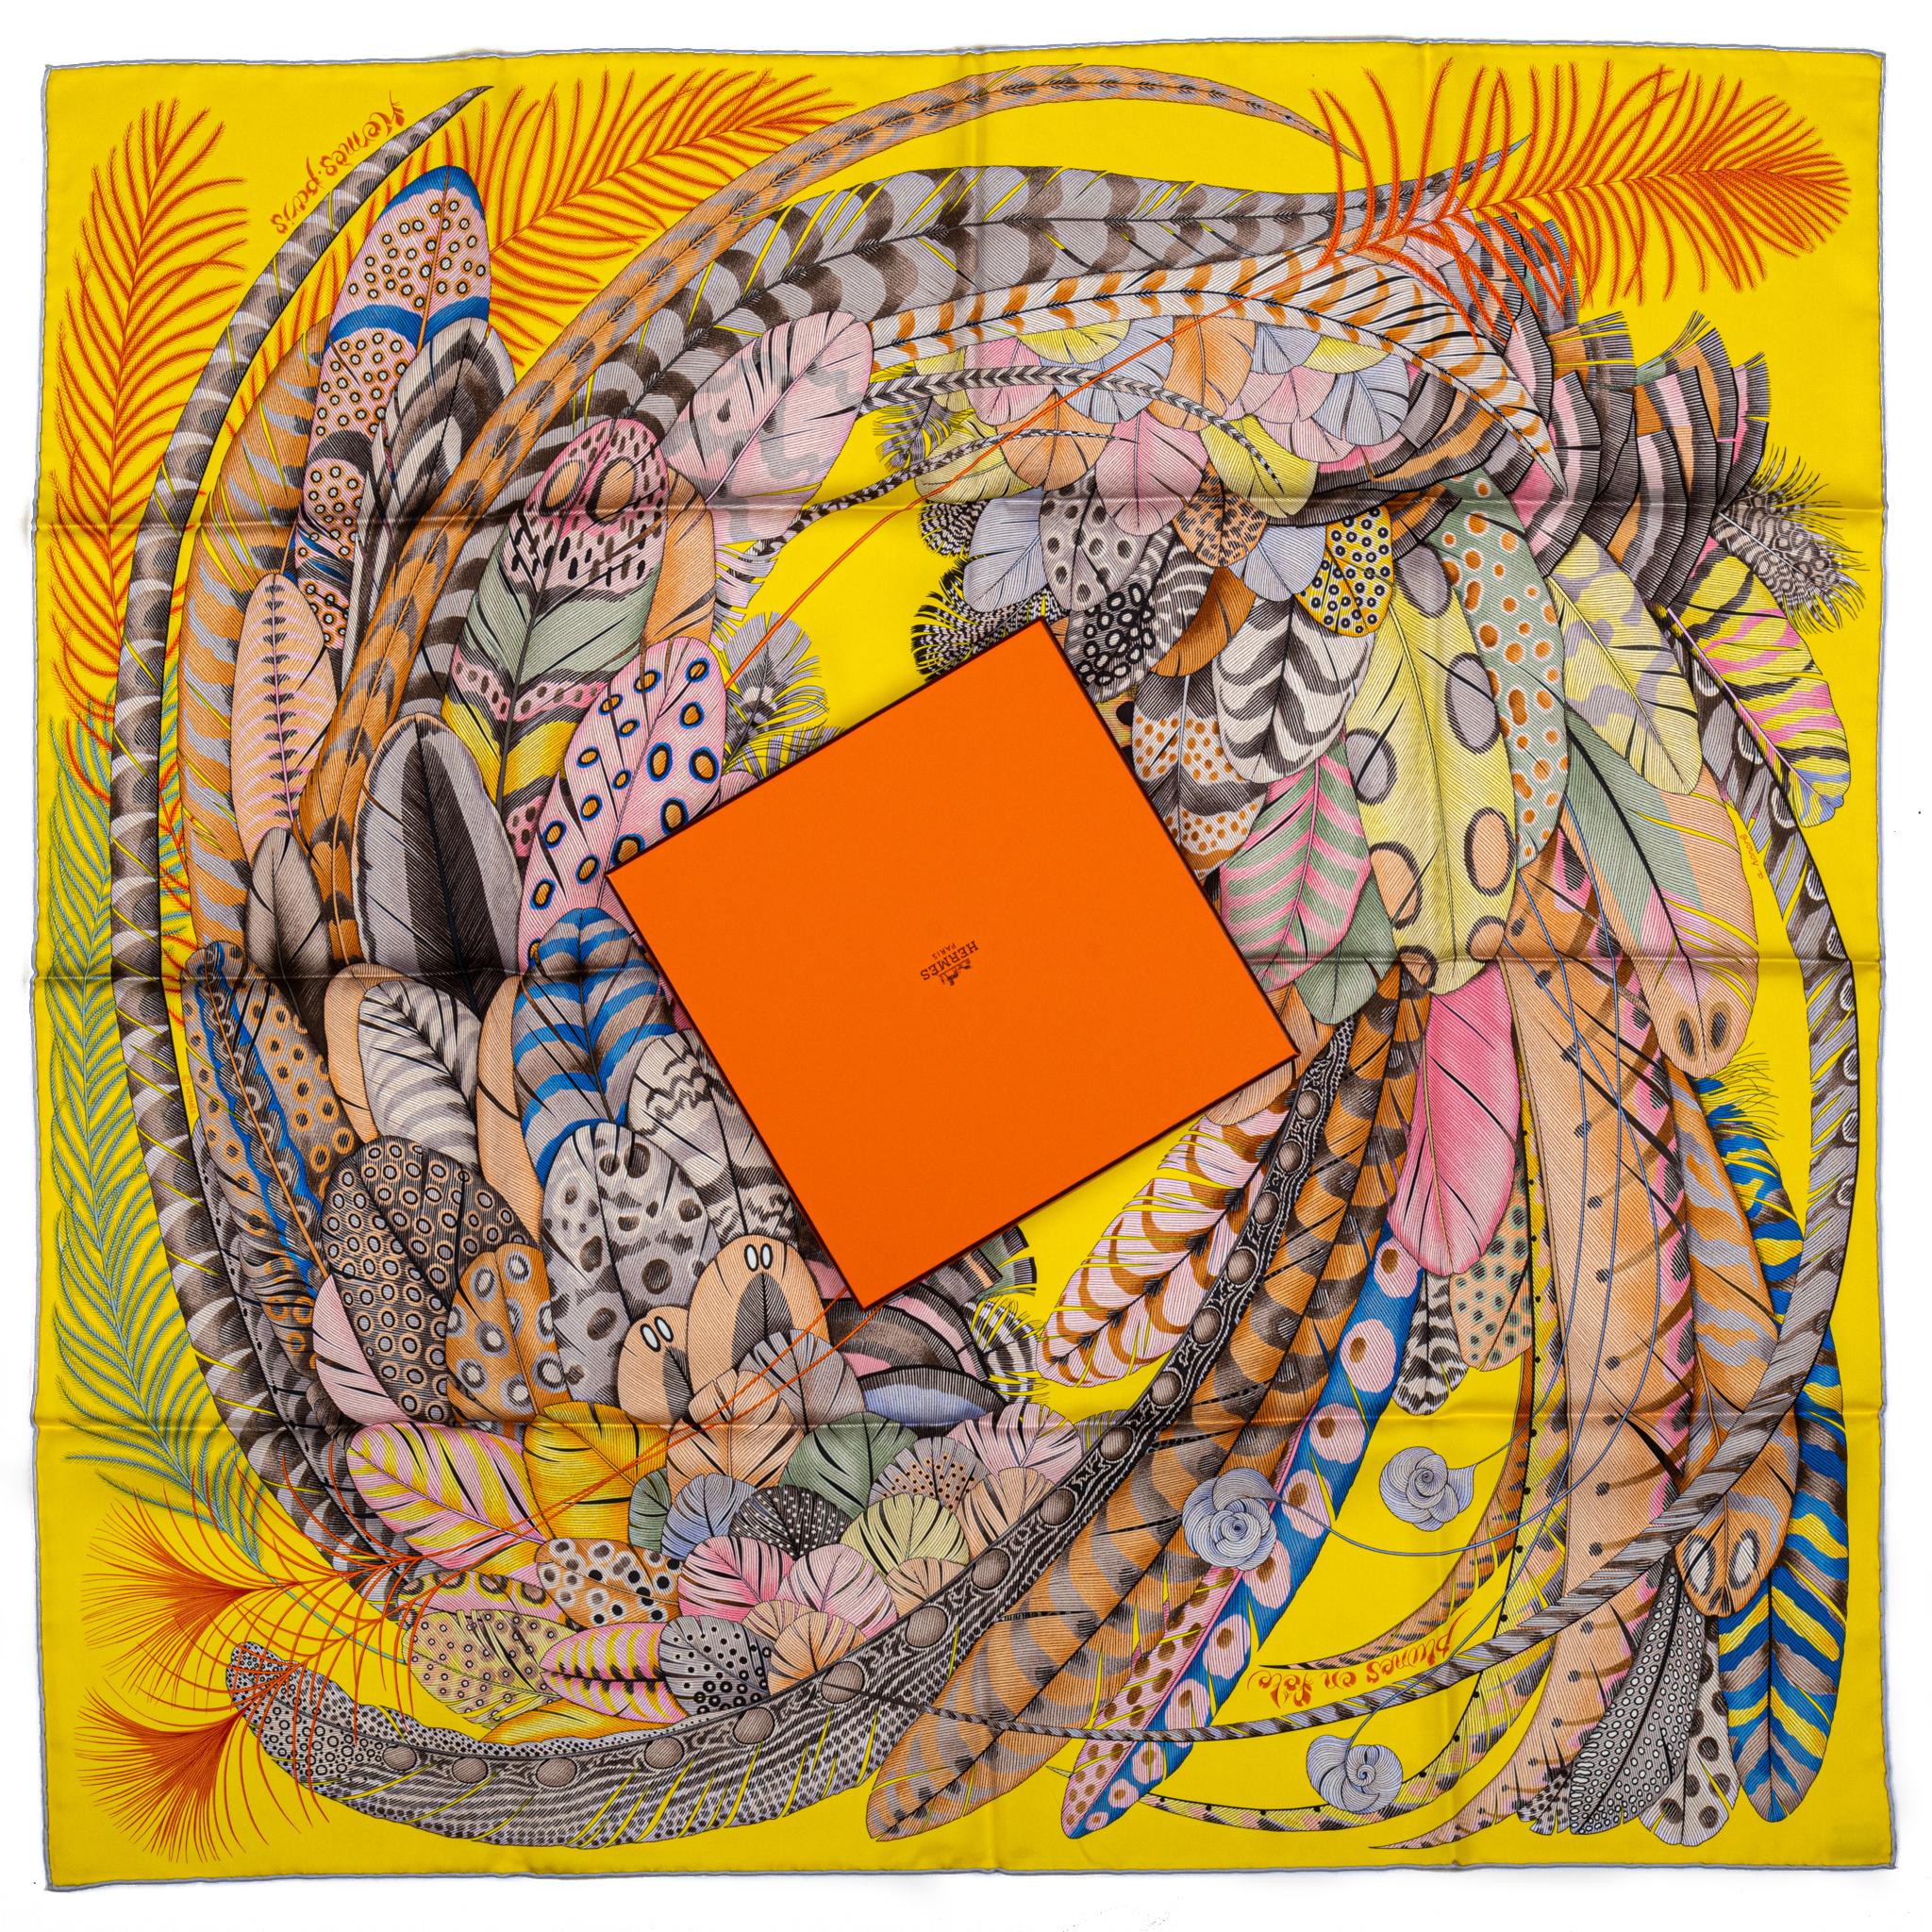 Hermes new in box yellow silk scarf with feathers design. Hand rolled edges. Comes with original box.